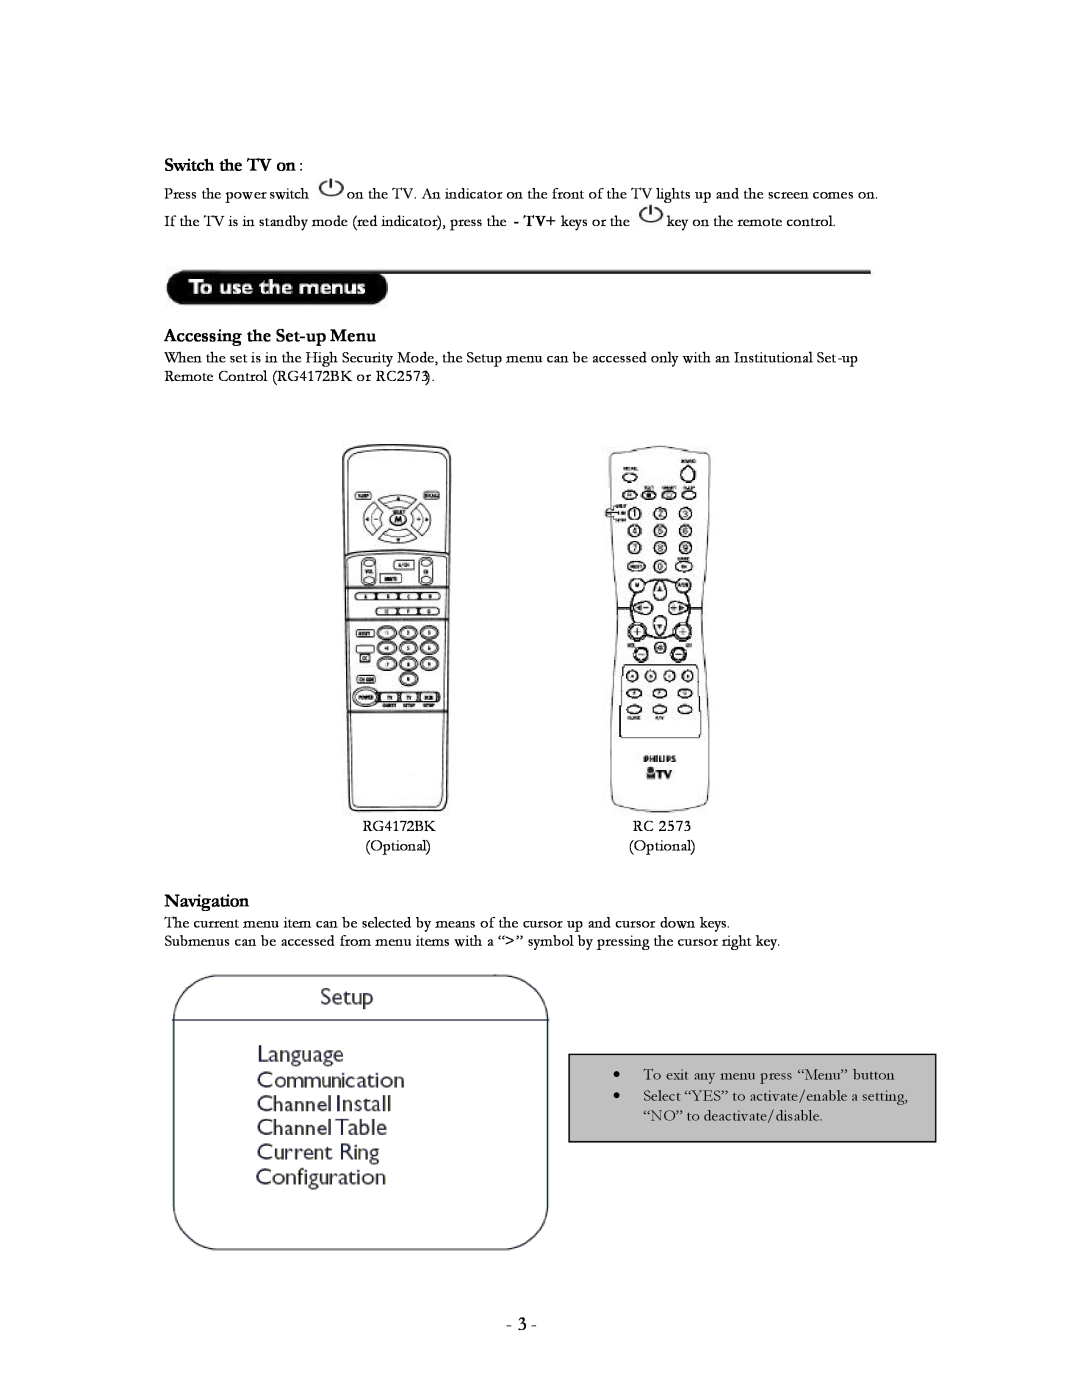 Philips 20FT3310/37 user manual Switch the TV on, Accessing the Set-up Menu, Navigation, RG4172BK 